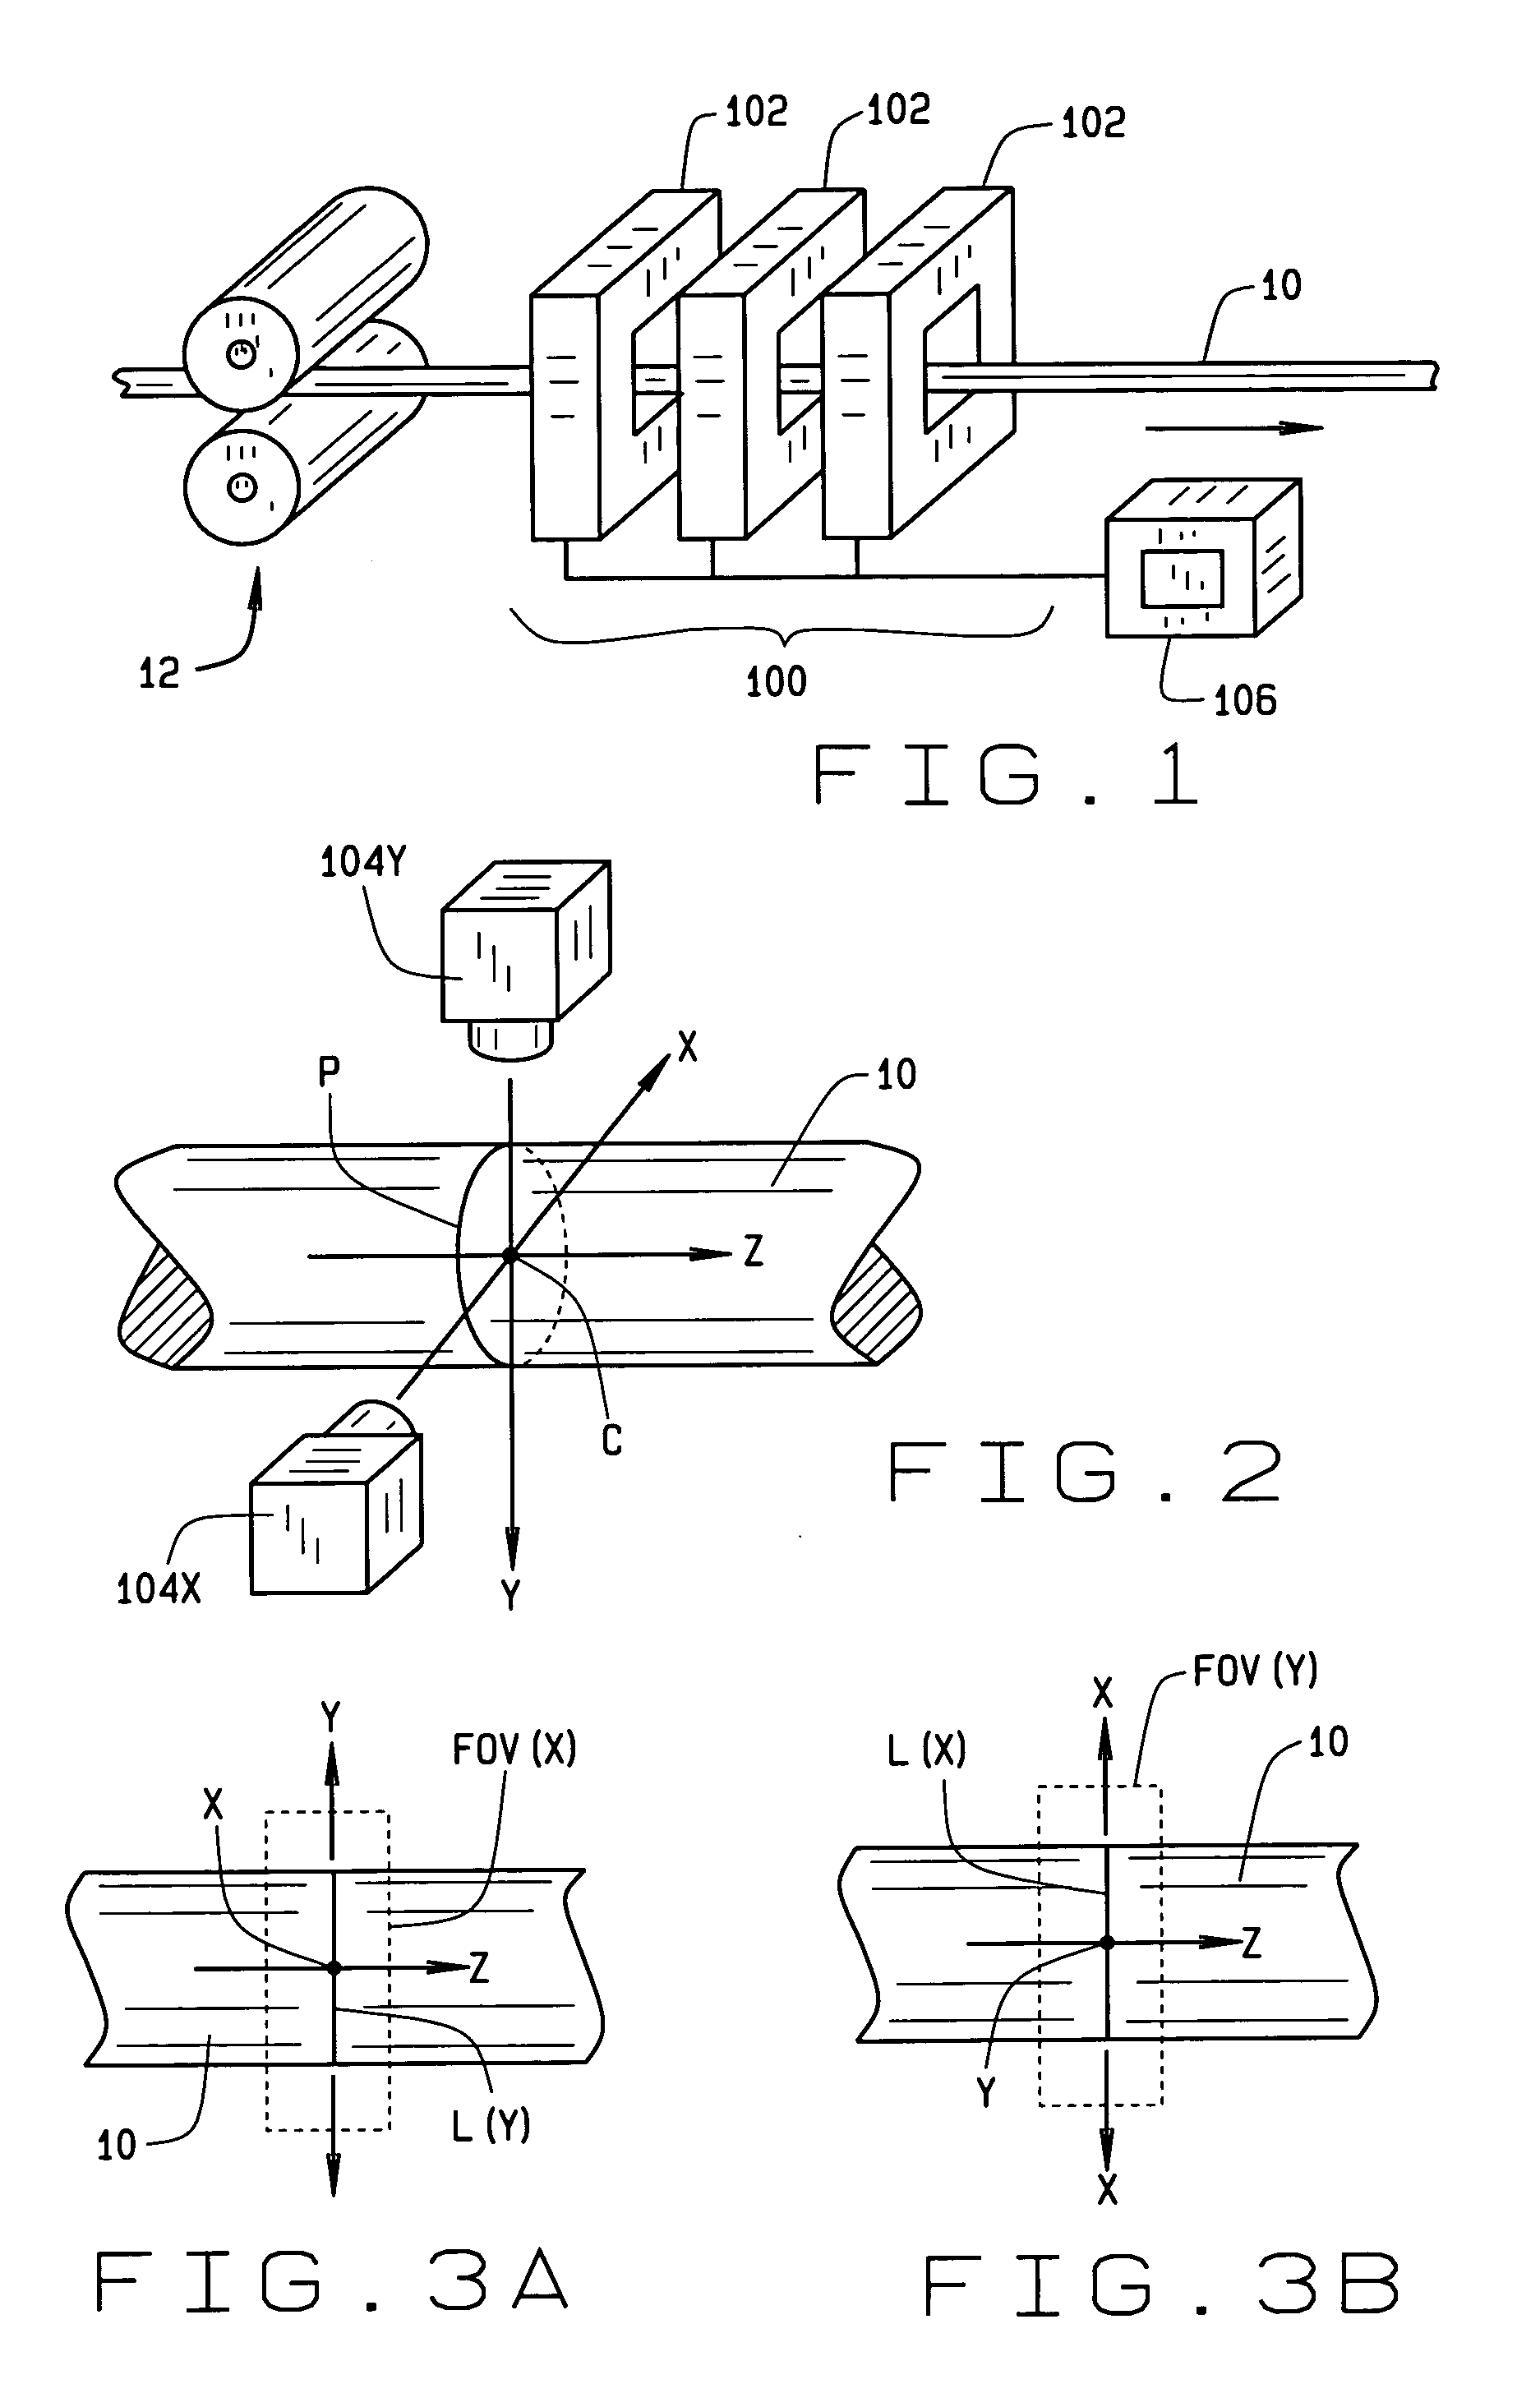 Method and apparatus for determining the straightness of tubes and bars